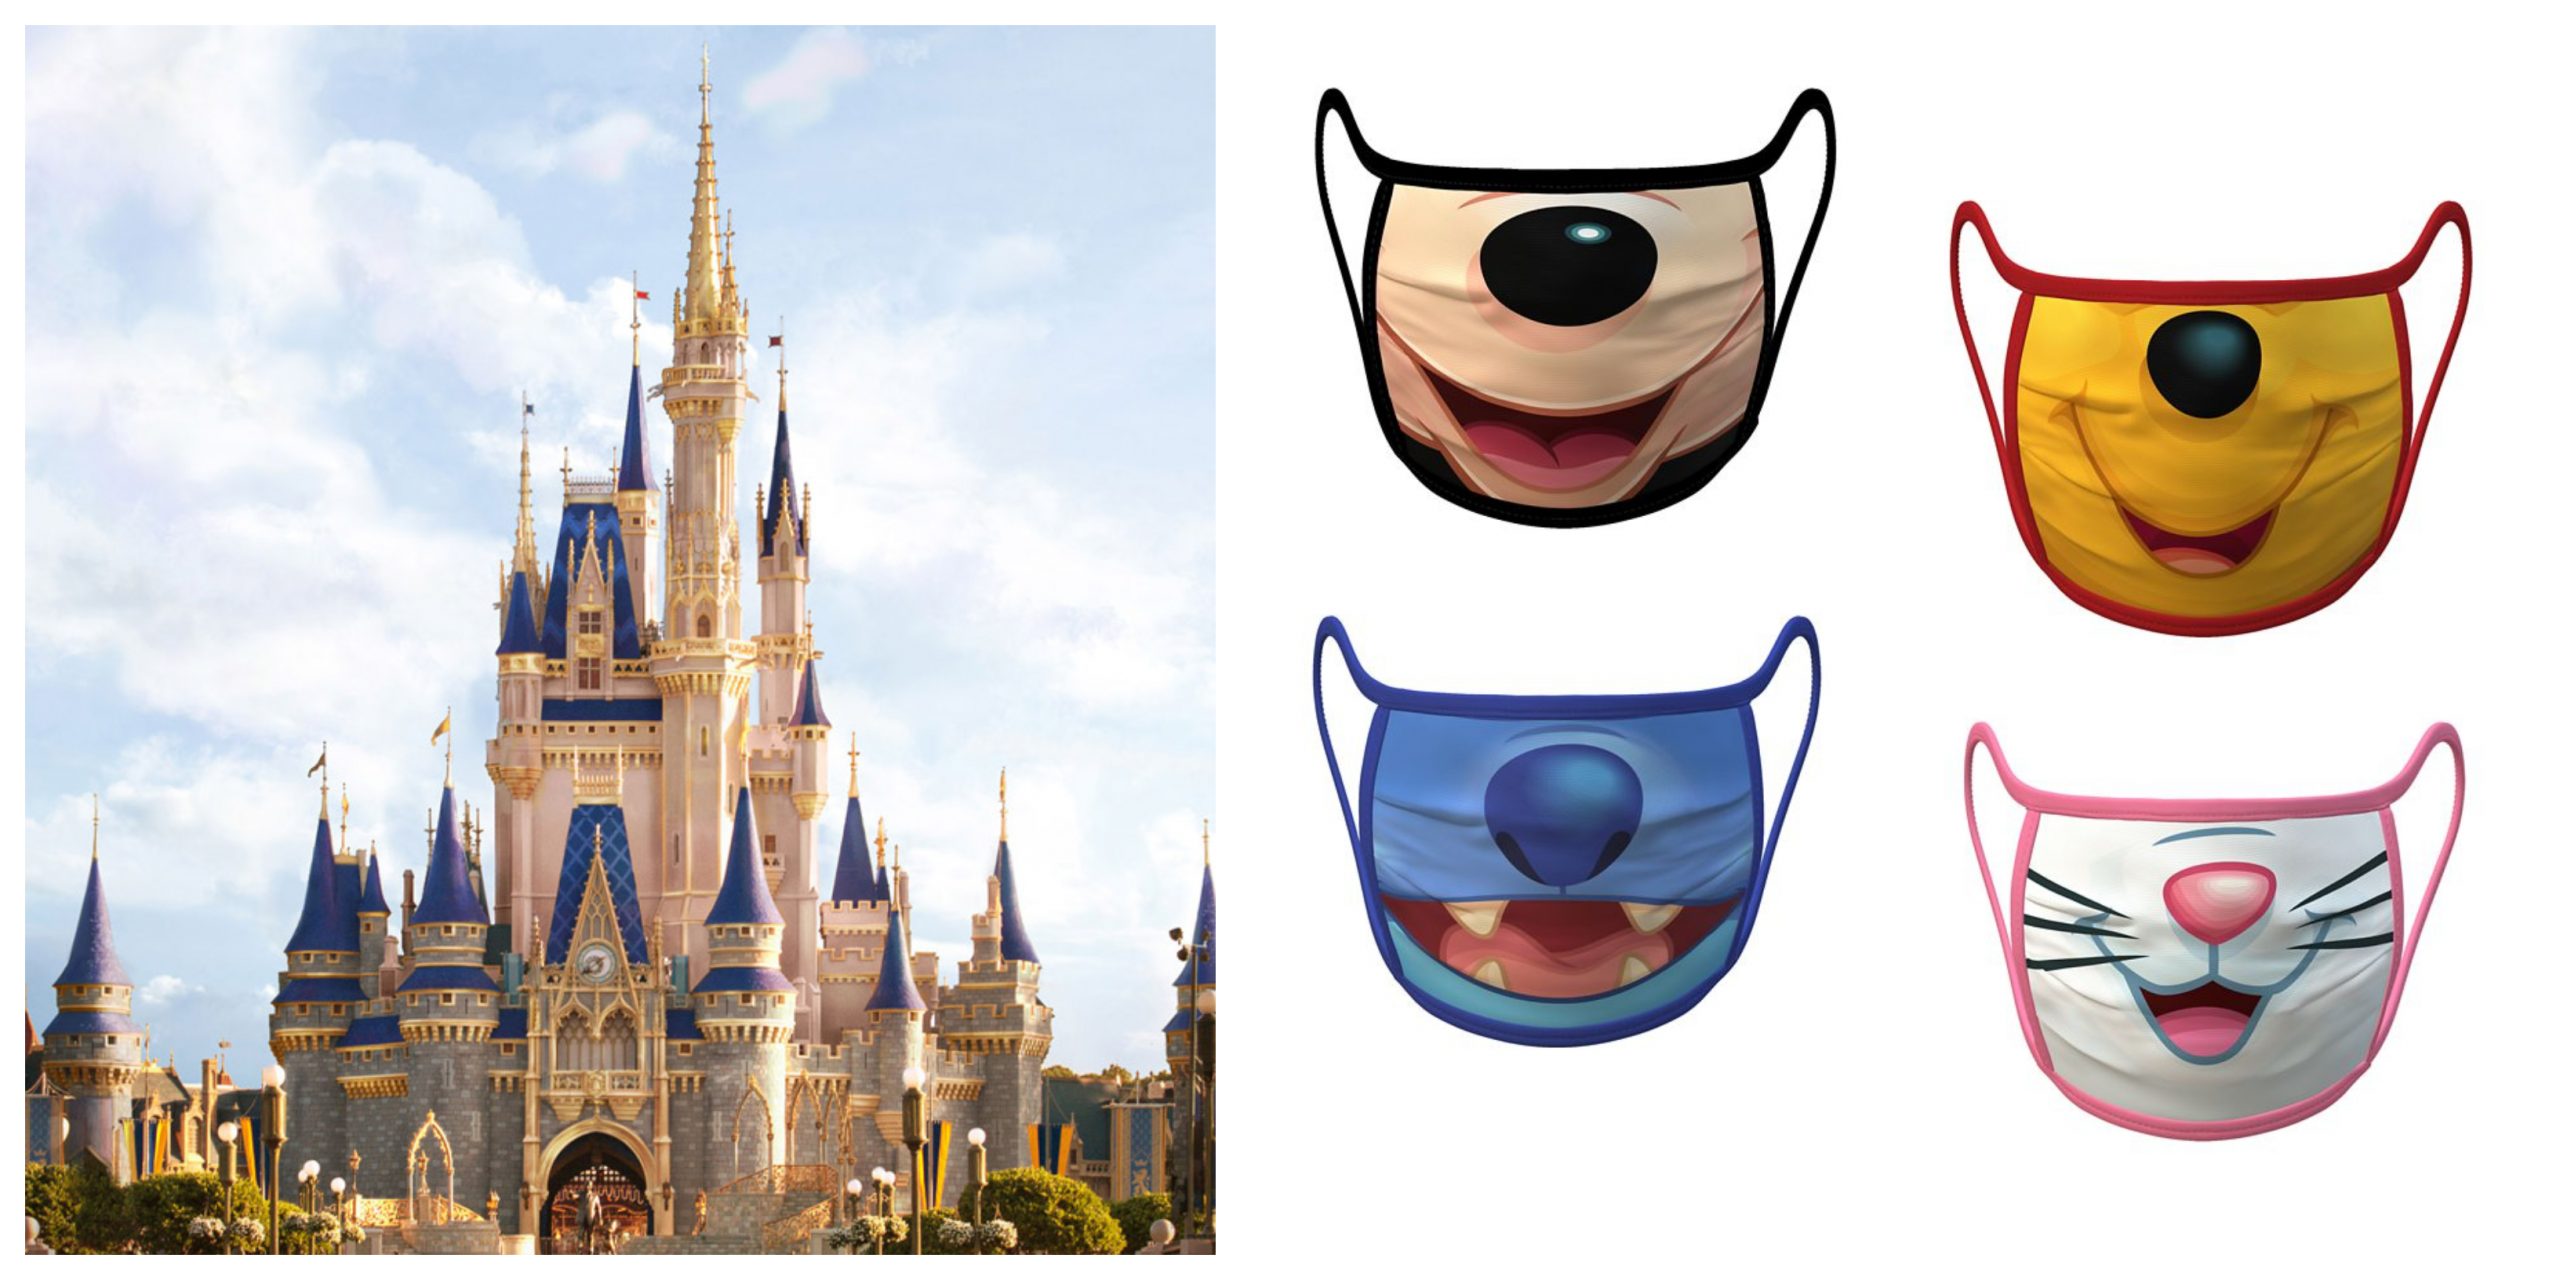 Walt Disney World Updates Age for Face Mask Policy